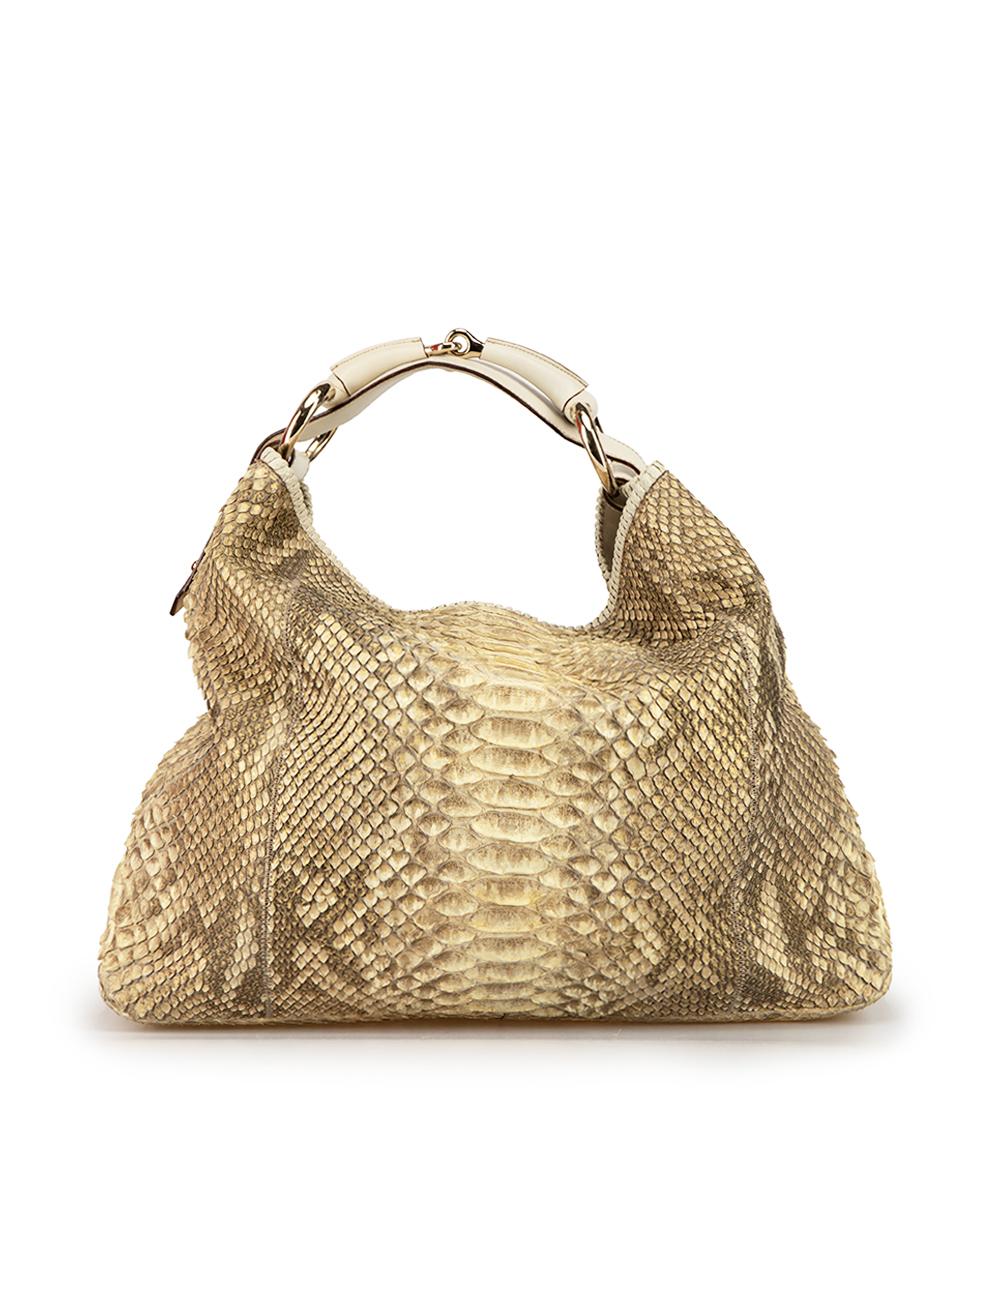 Gucci Vintage Gold Python Horsebit Hobo Bag In Good Condition For Sale In London, GB